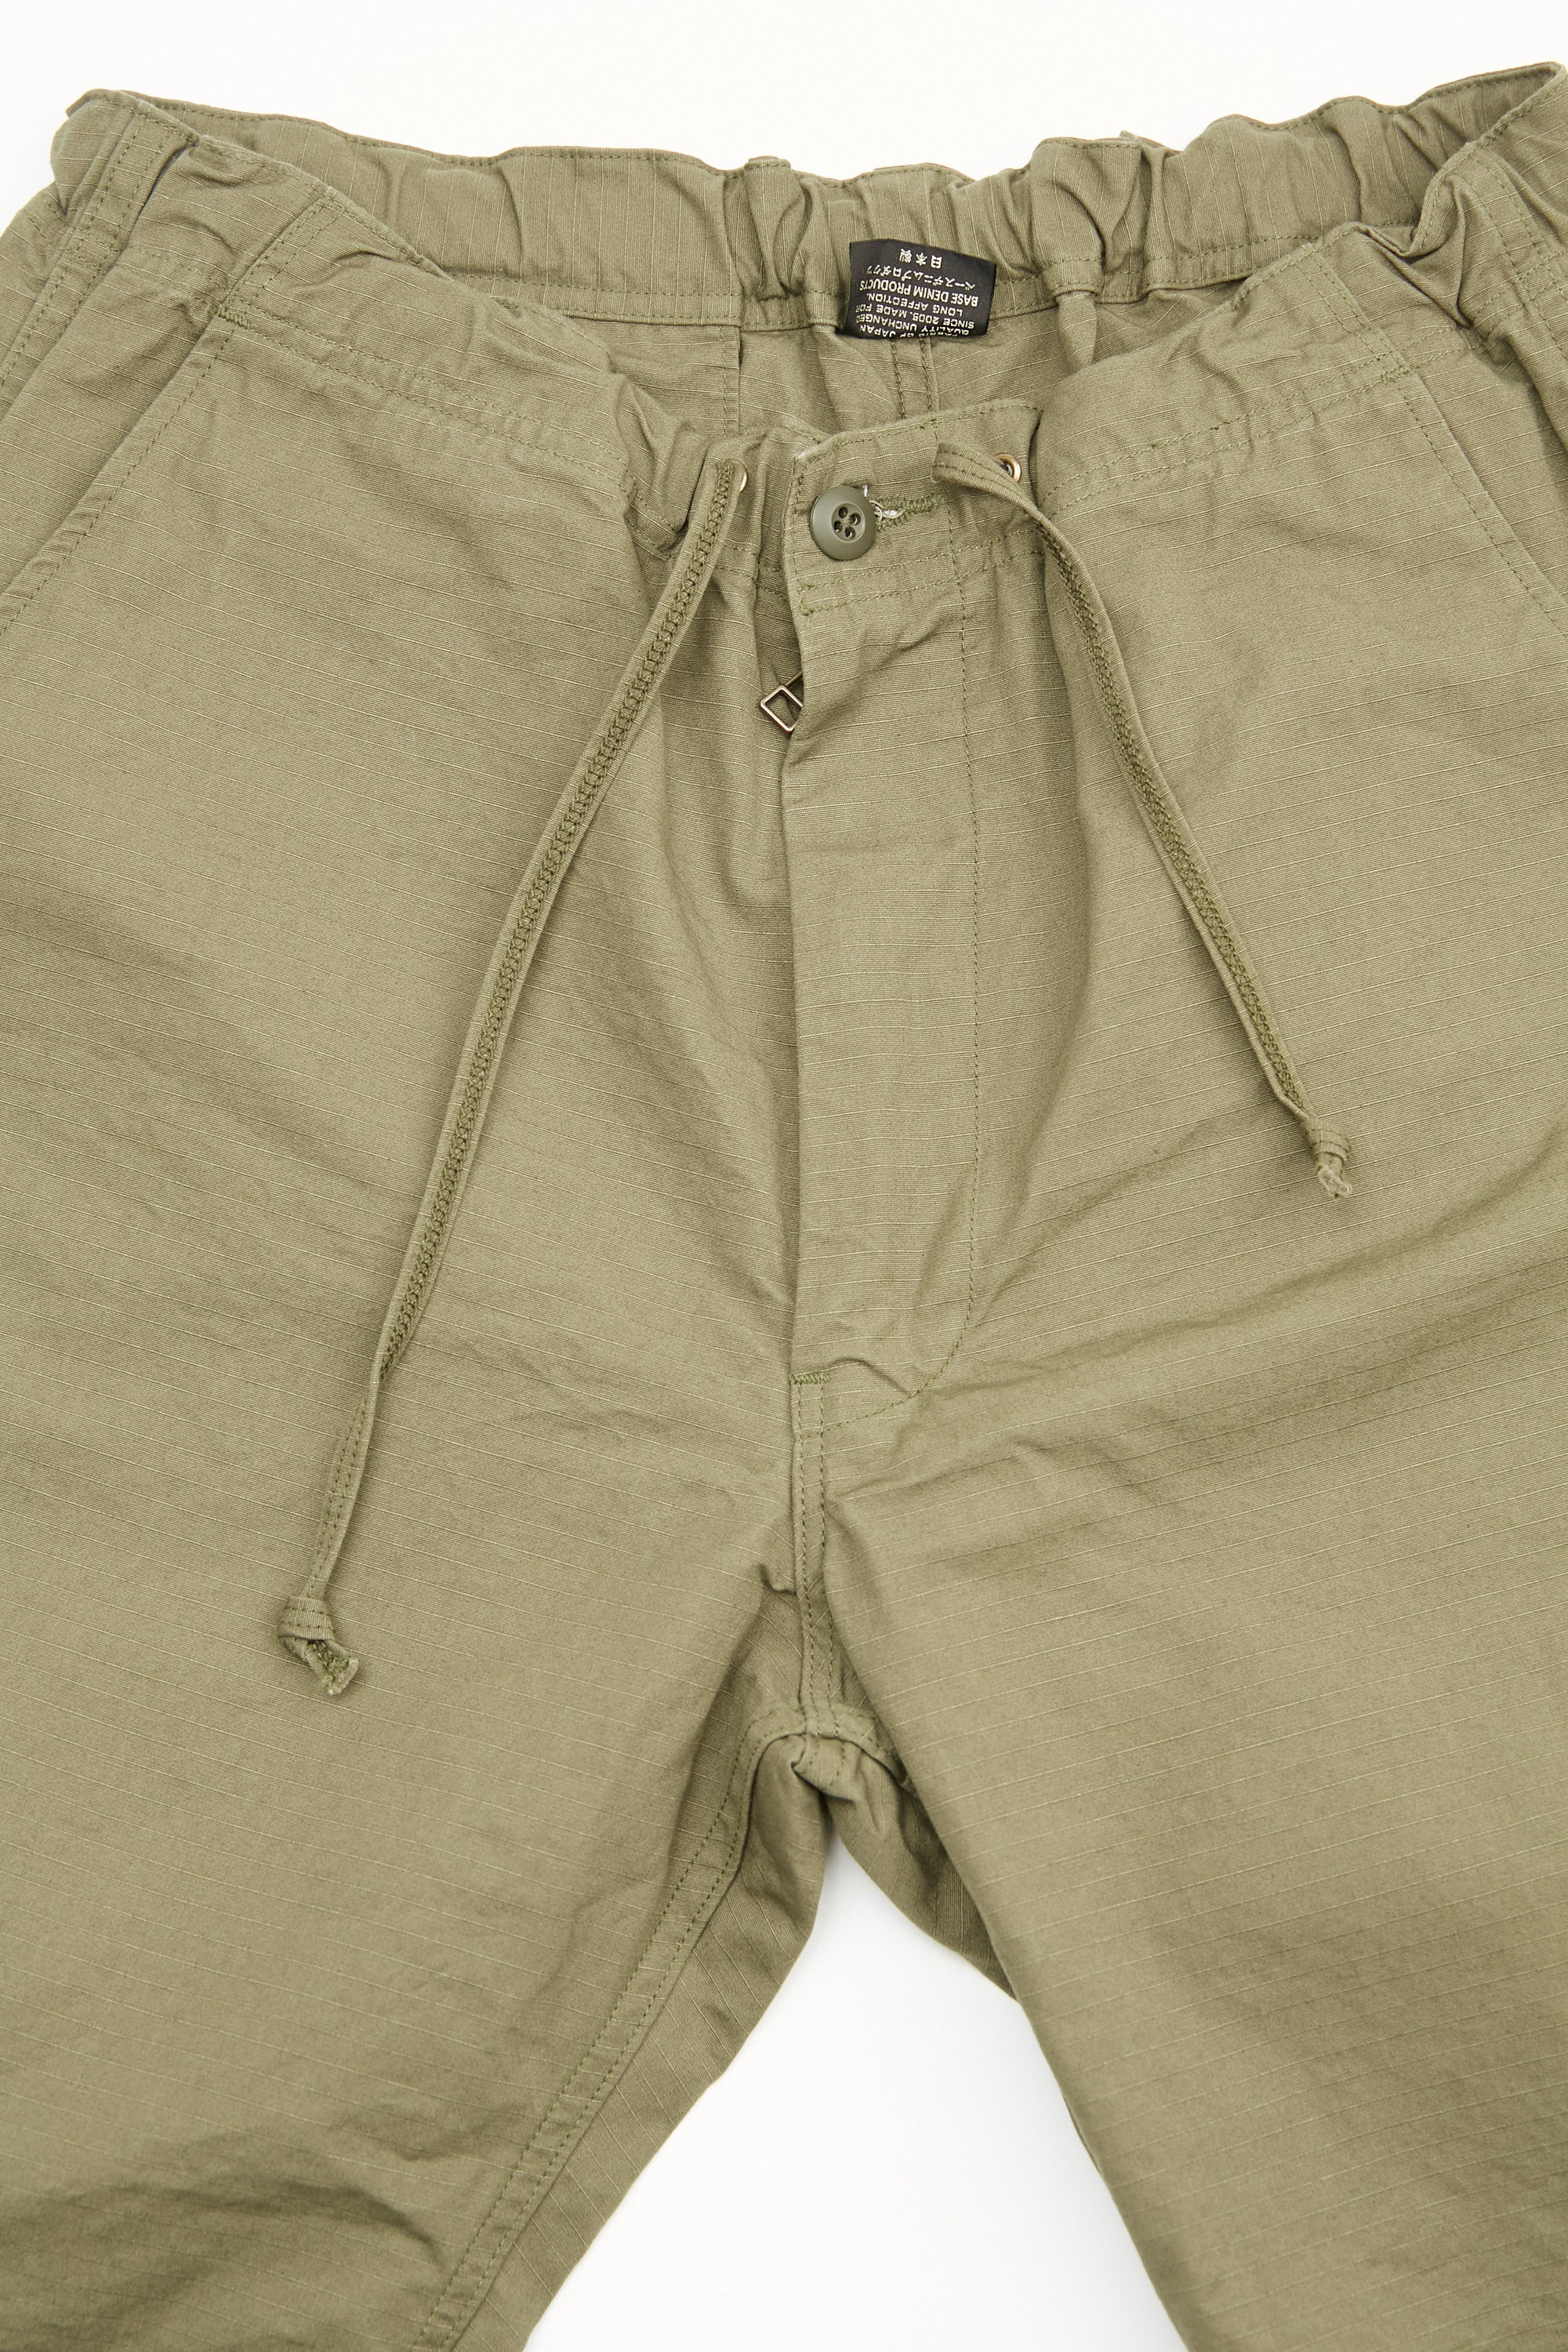 orSlow New Yorker Shorts - Army Green